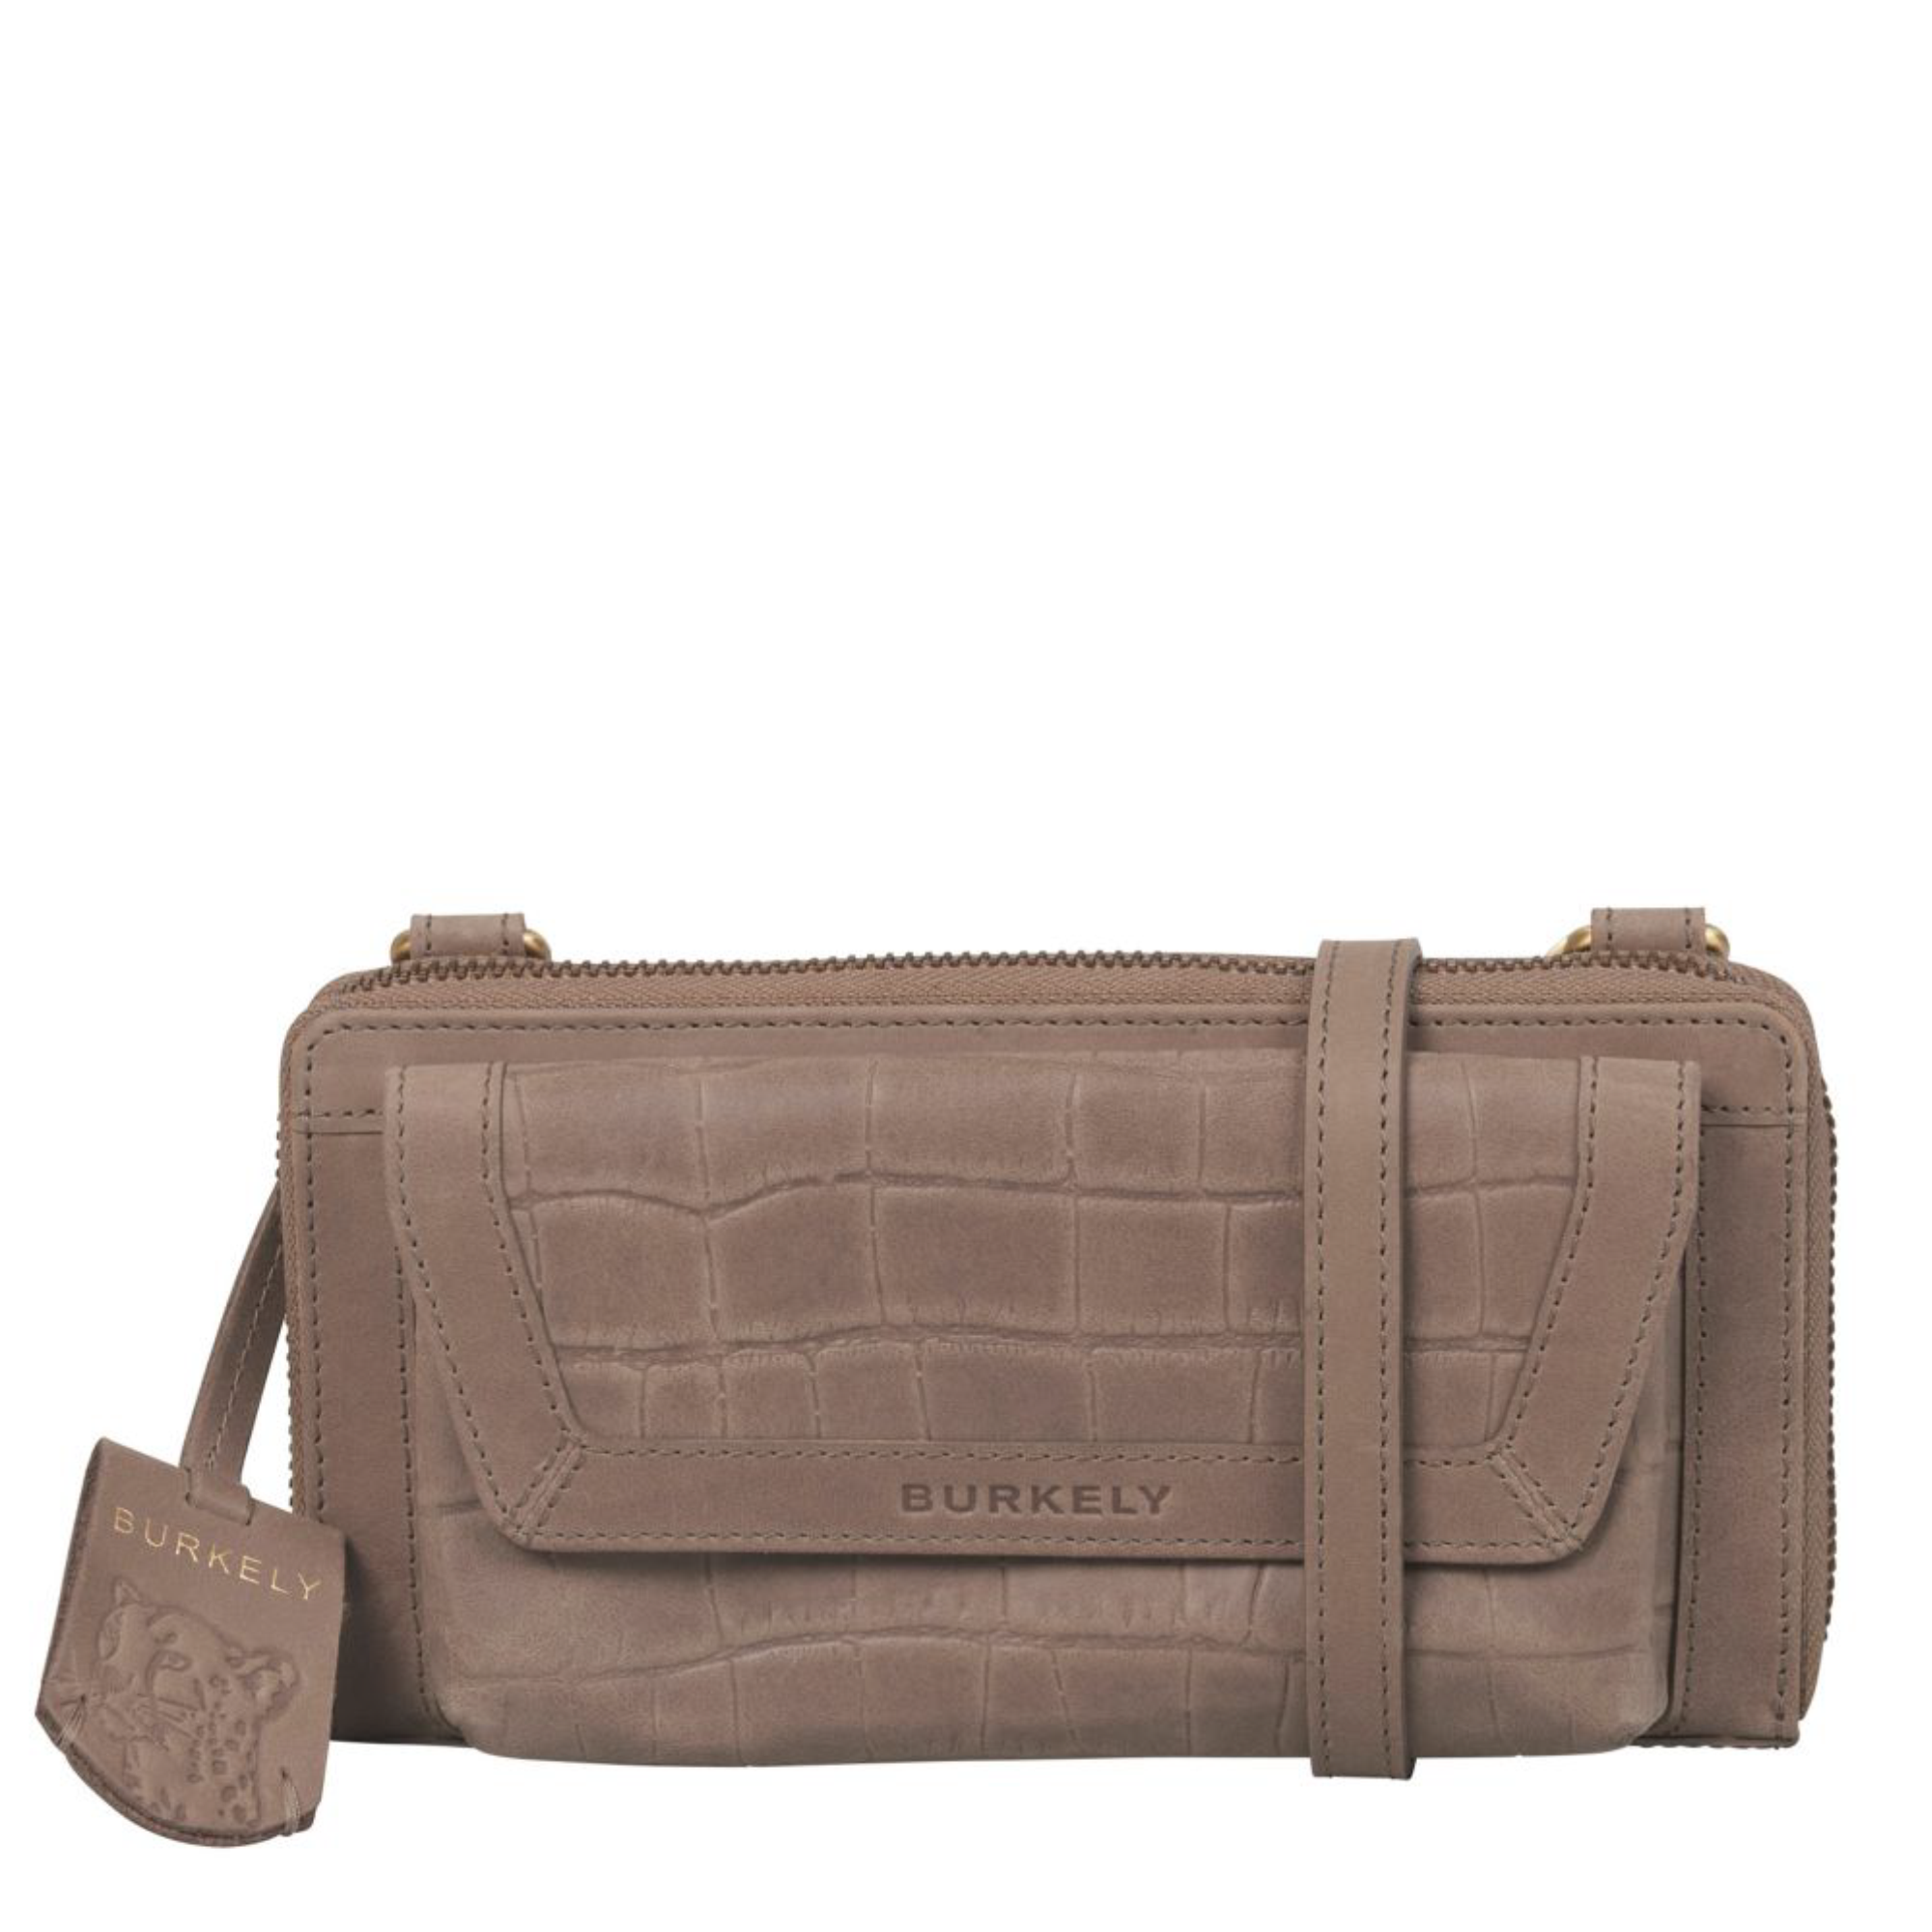 Burkely 1000129 Phone wallet 29.25 Taupe